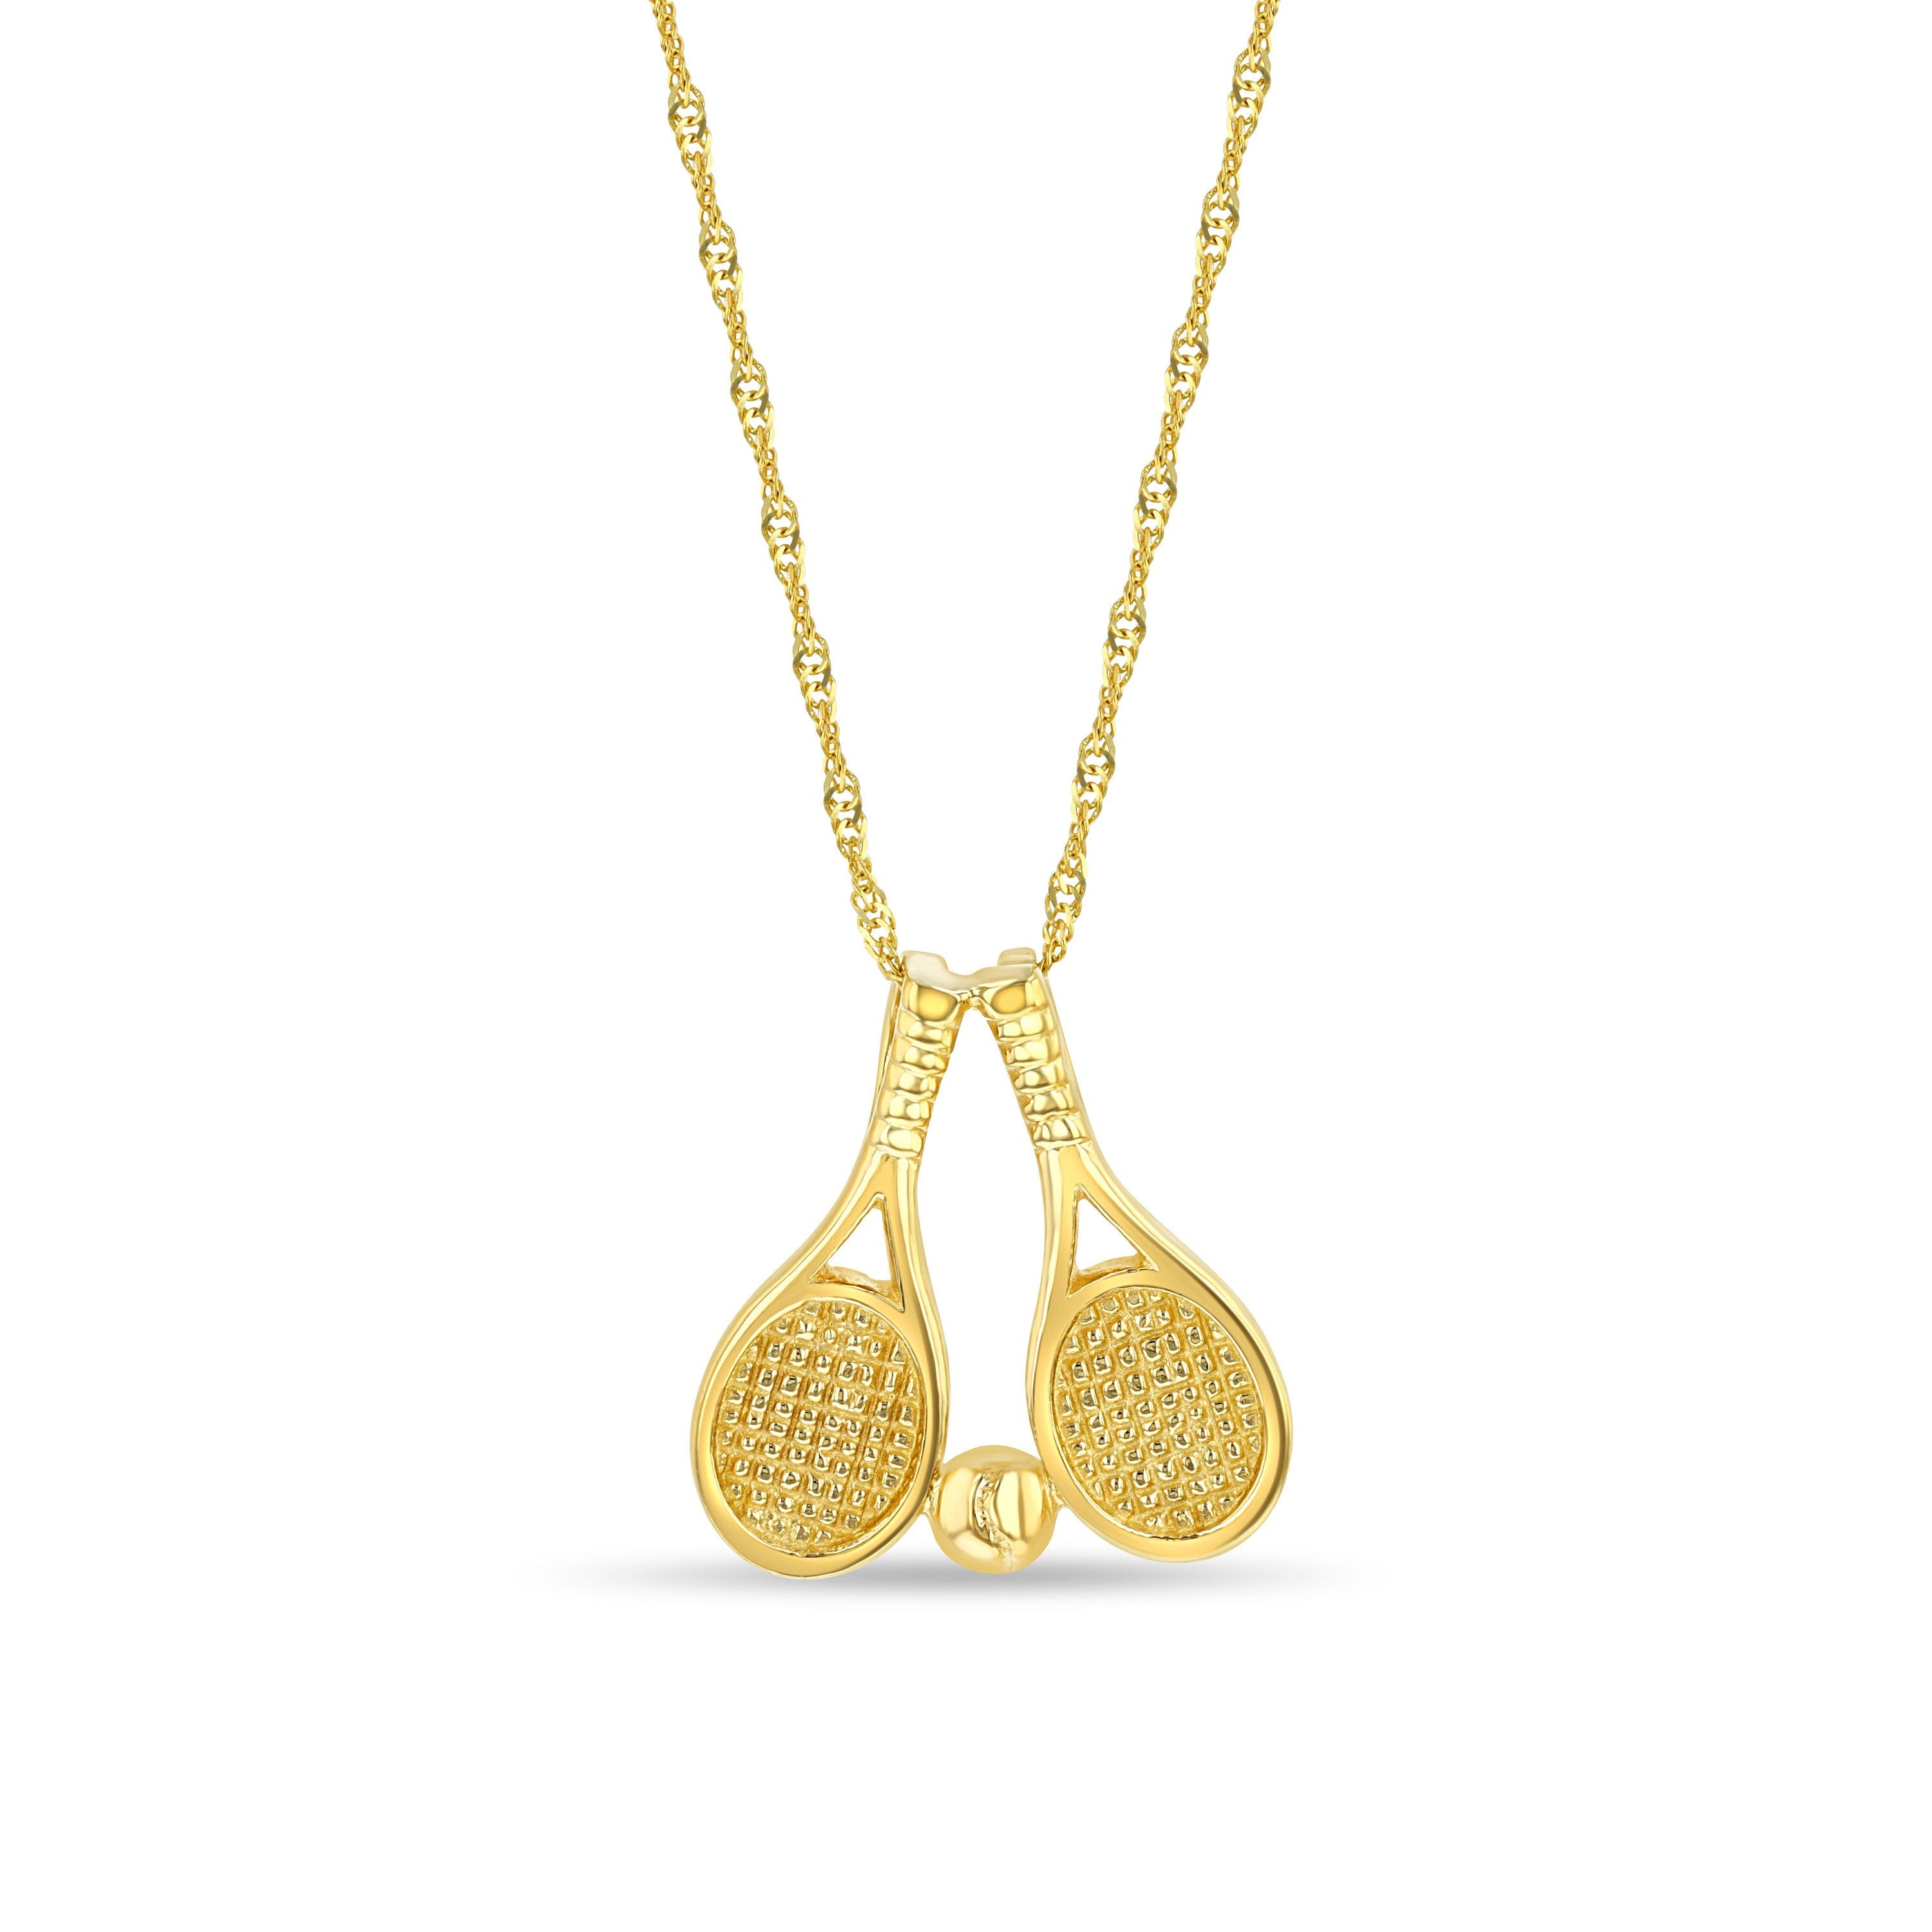 14k solid gold Tennis rackets with tennis ball pendant on 18" solid gold chain